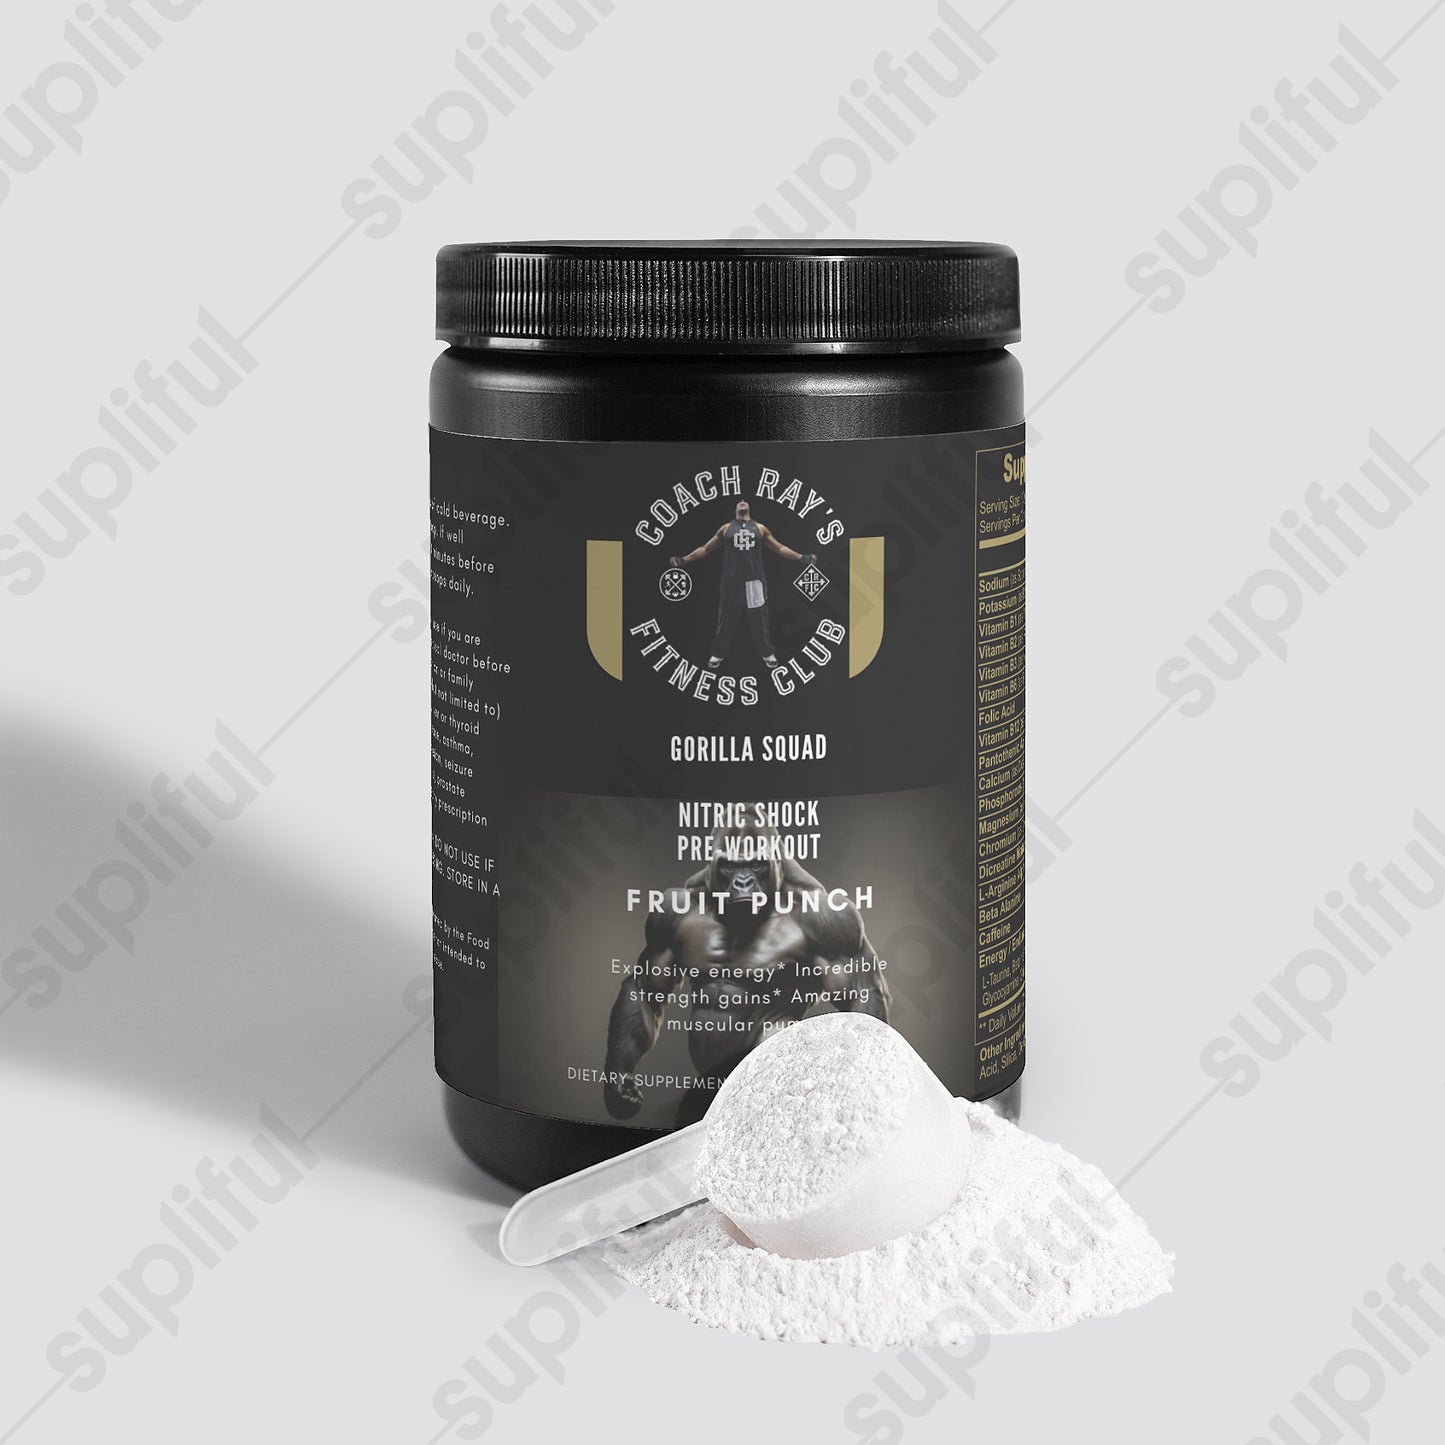 Coach Ray's Nitric Shock Pre-Workout Powder (Fruit Punch)